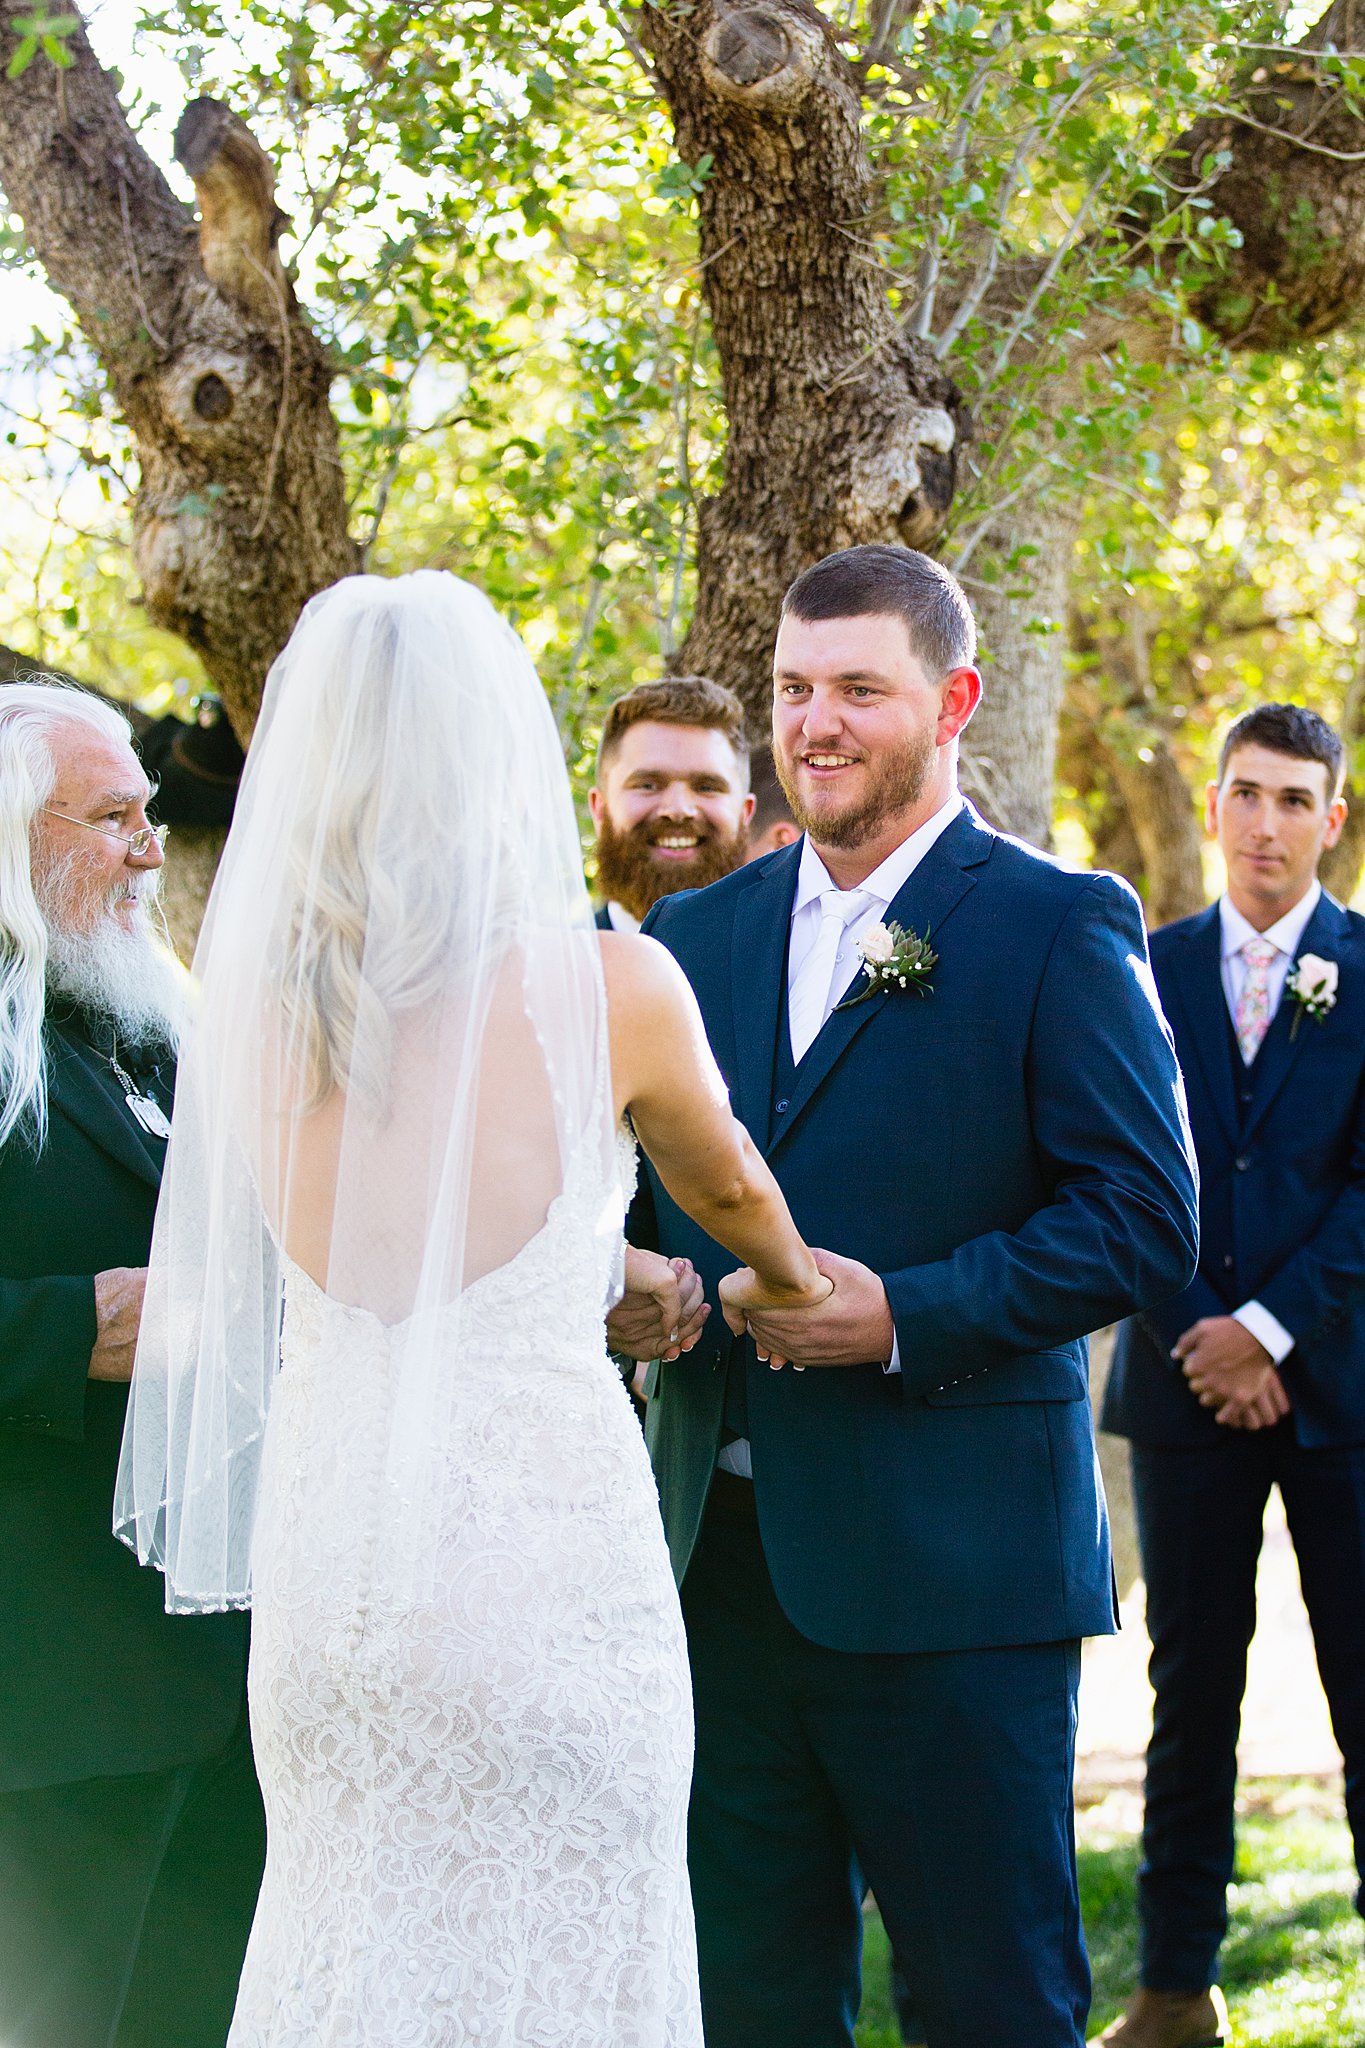 Groom looking at his bride during their wedding ceremony at Van Dickson Ranch by Skull Valley wedding photographer PMA Photography.